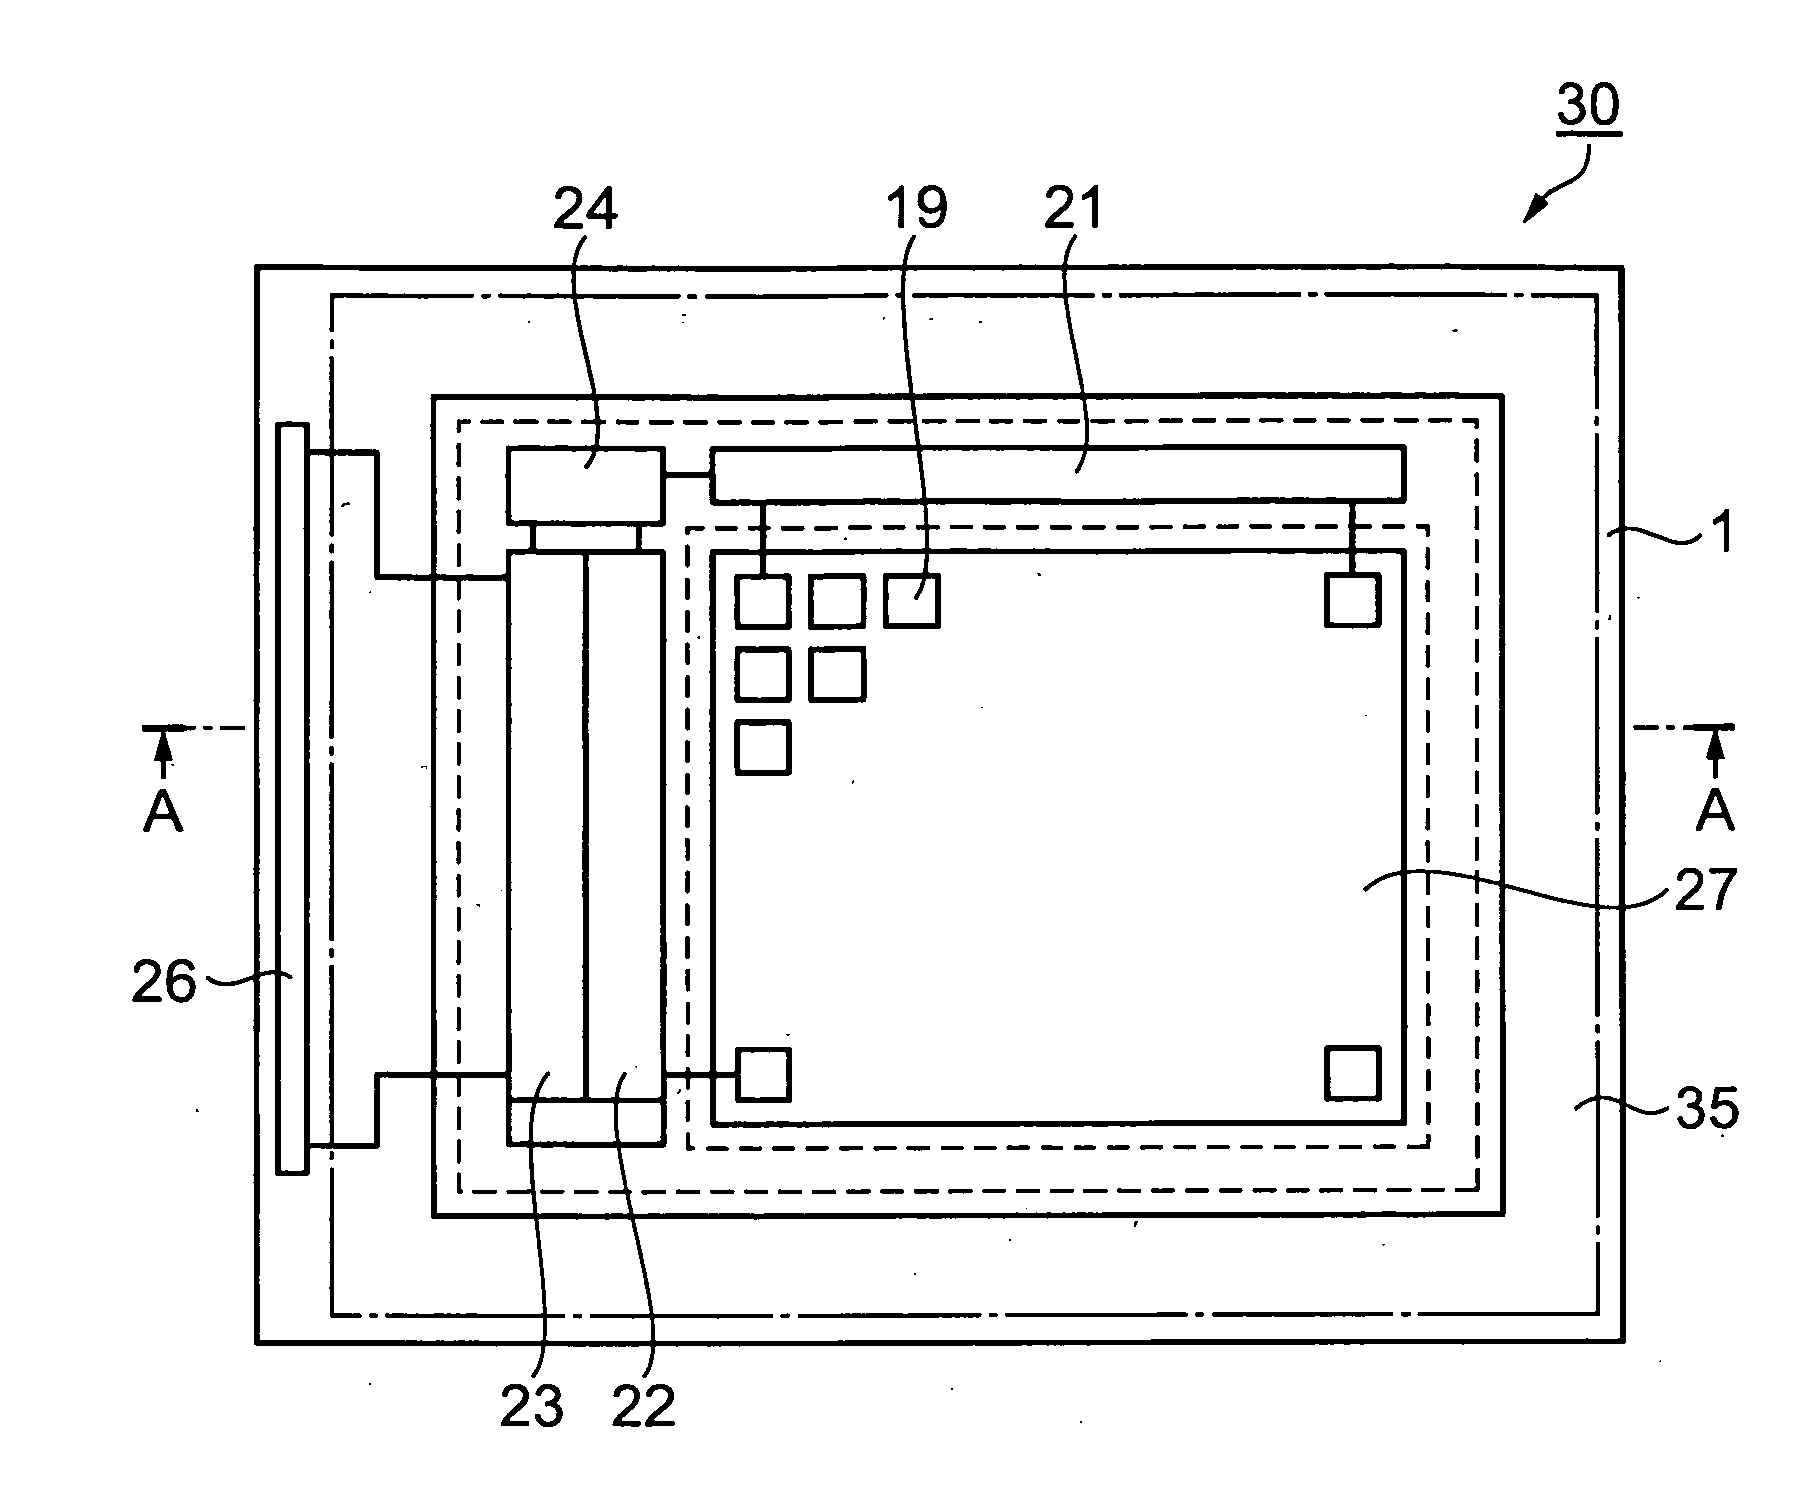 Electro-optic substrate, electro-optic device, method of designing the electro-optic substrate, and electronic device